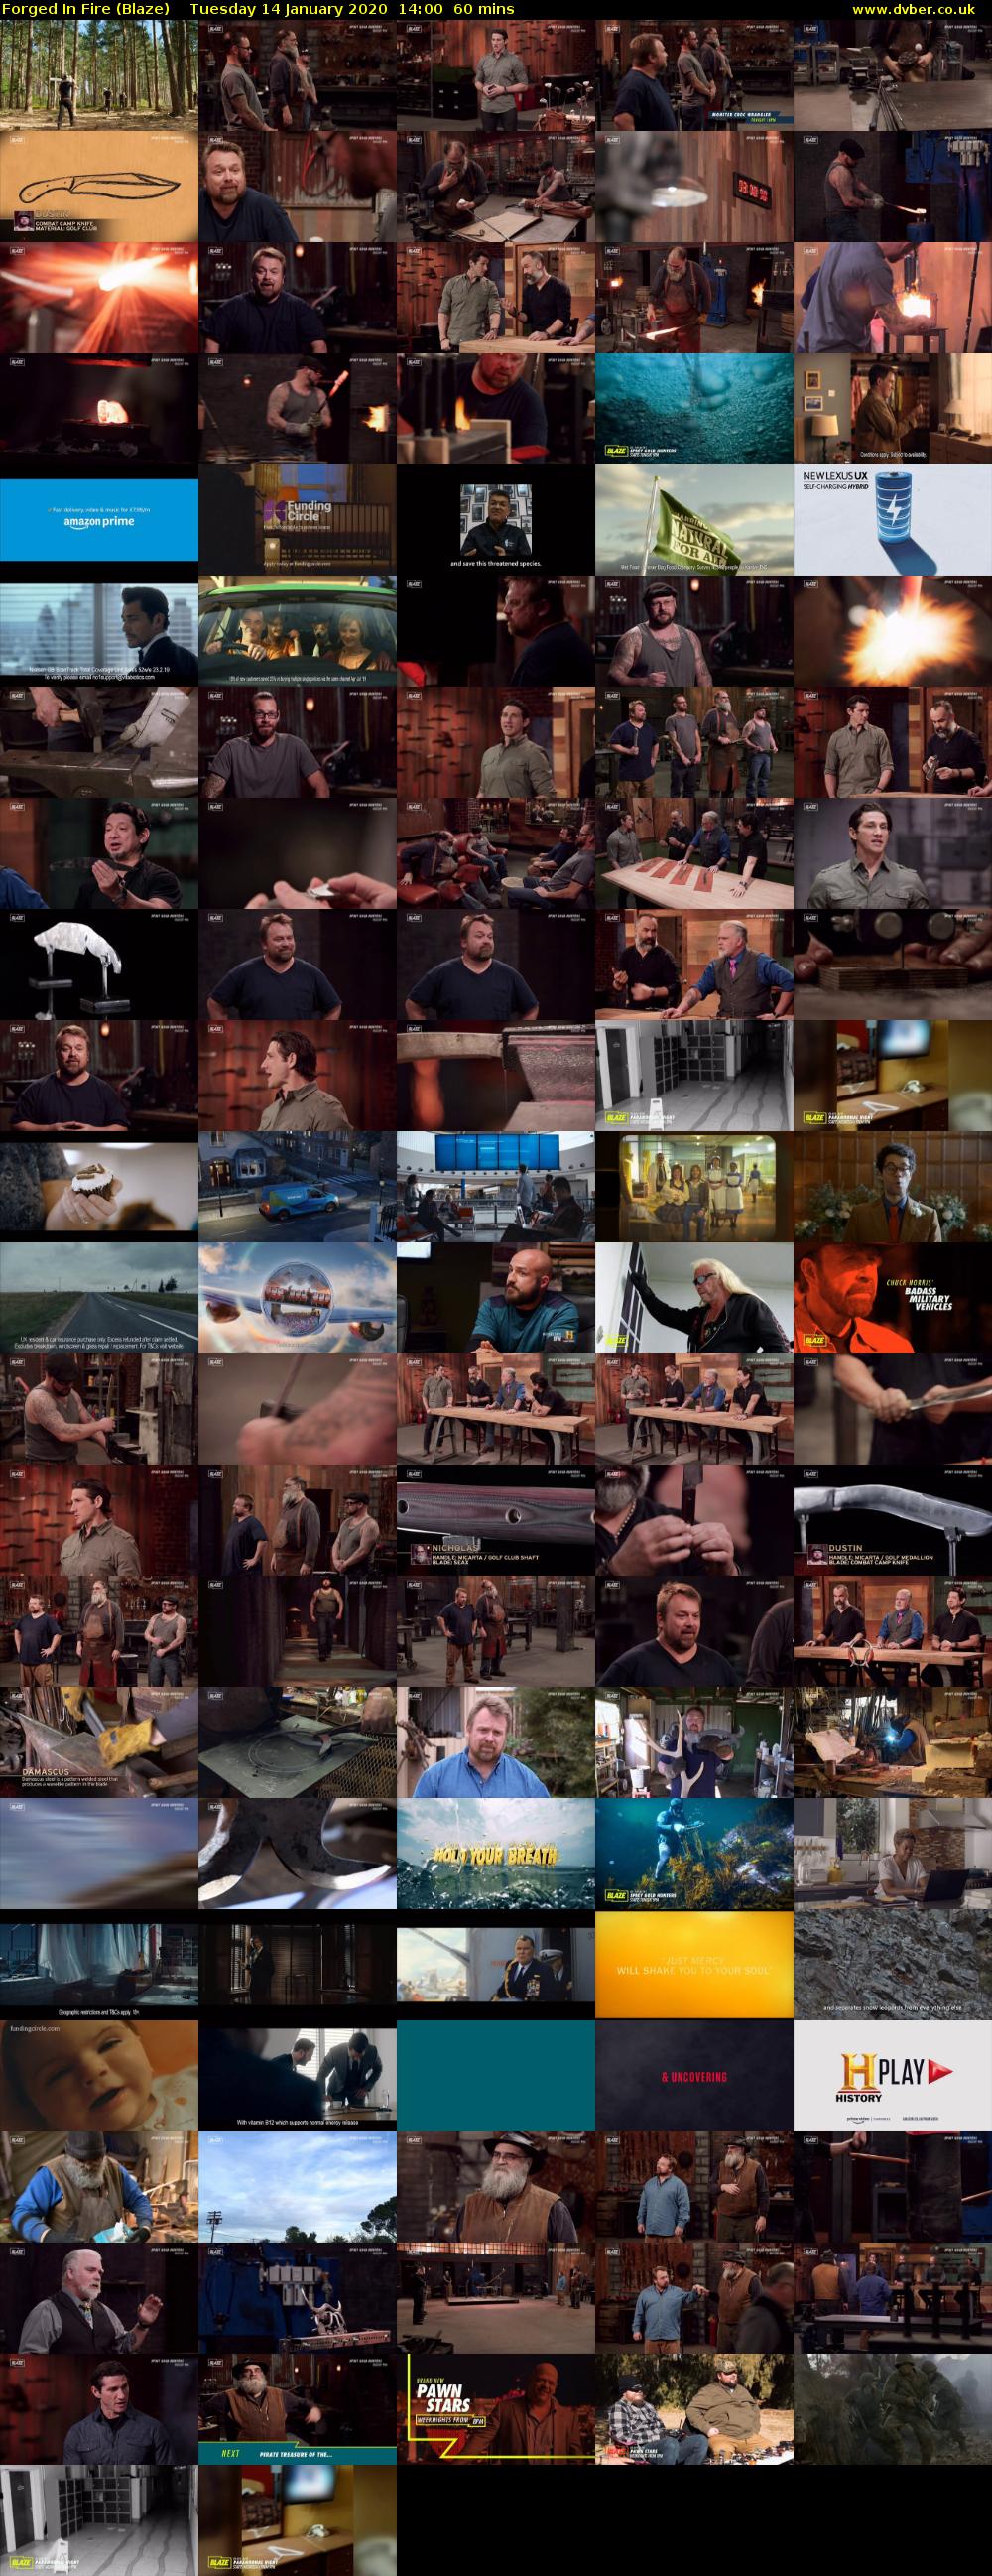 Forged In Fire (Blaze) Tuesday 14 January 2020 14:00 - 15:00